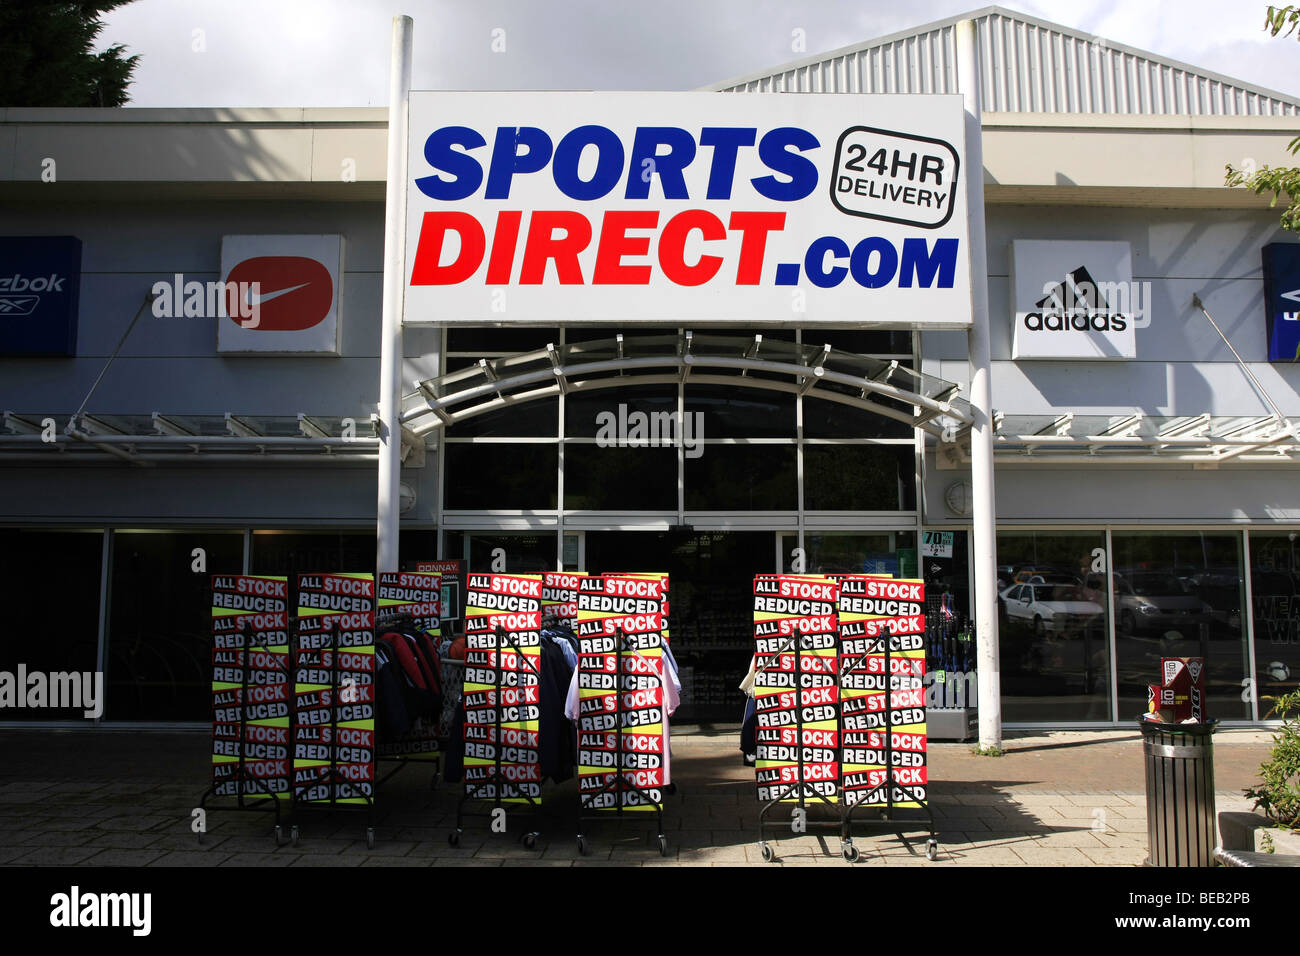 Sports Direct.com Sporting goods store and overhead sign Stock Photo